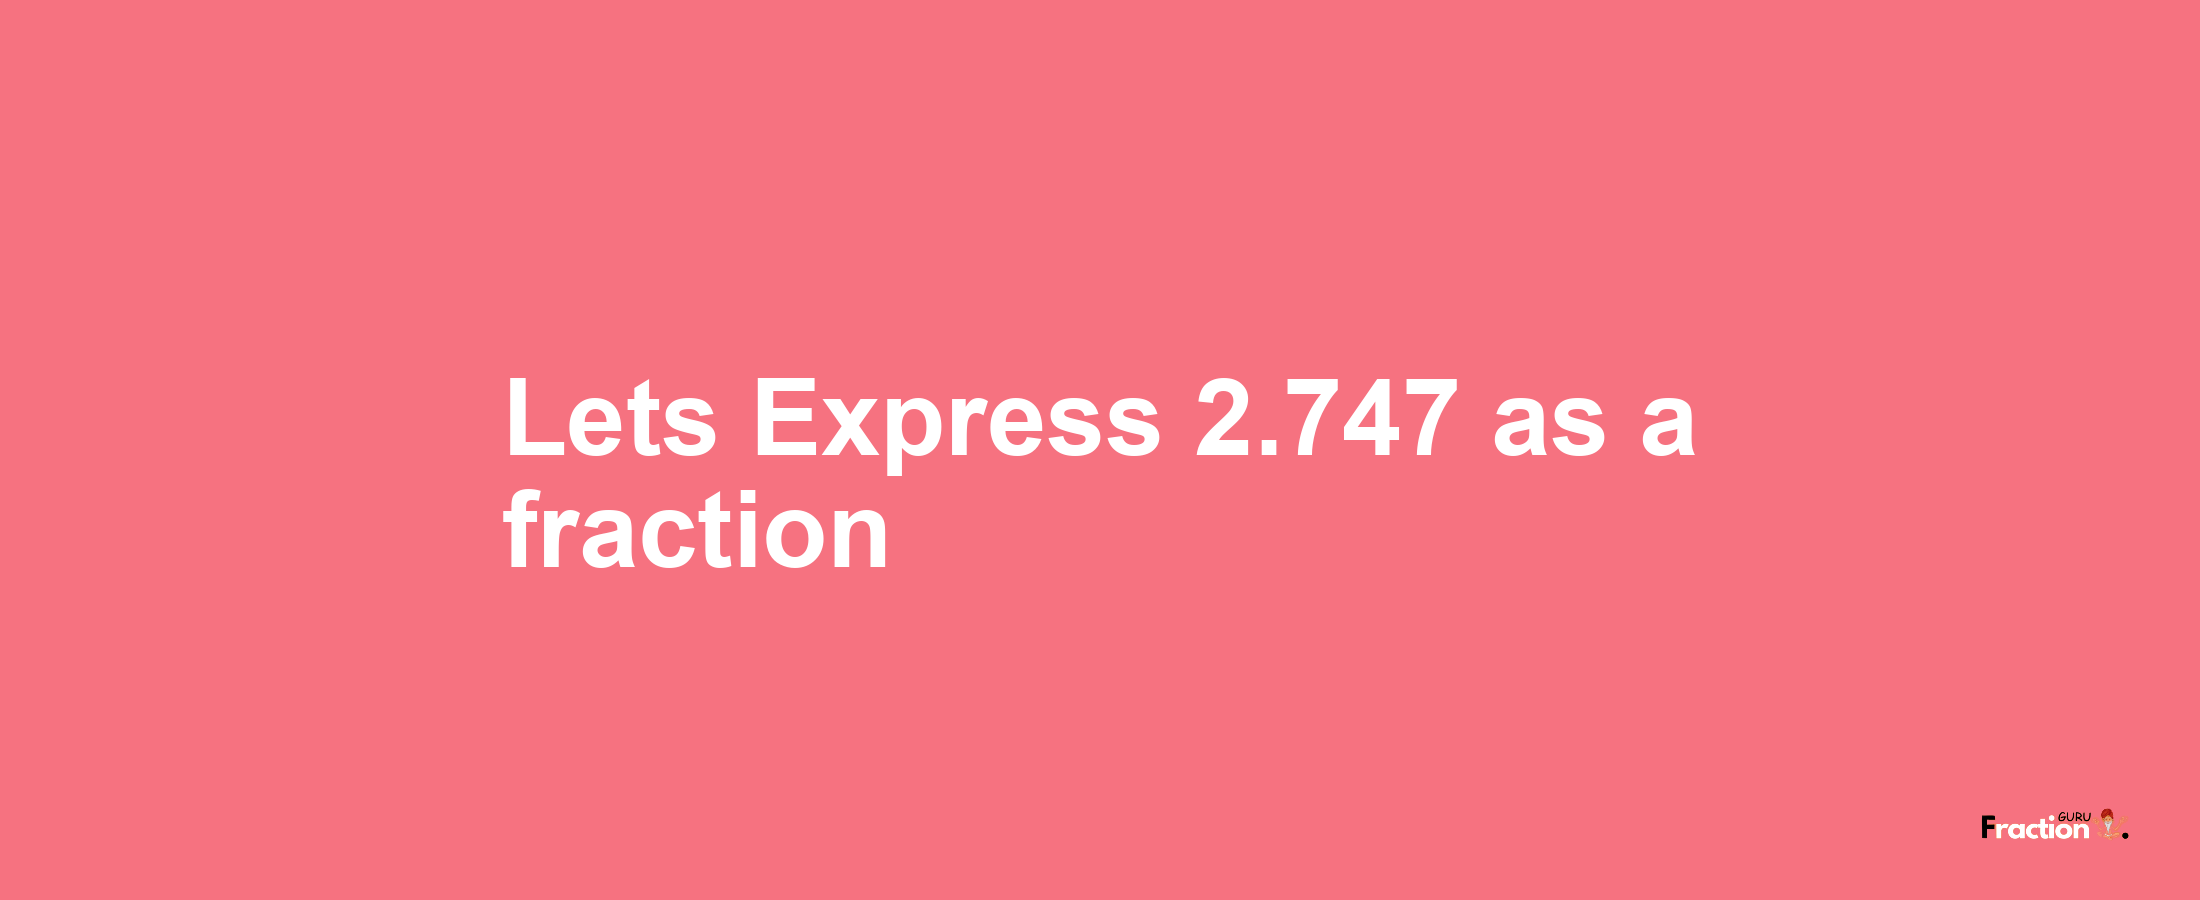 Lets Express 2.747 as afraction